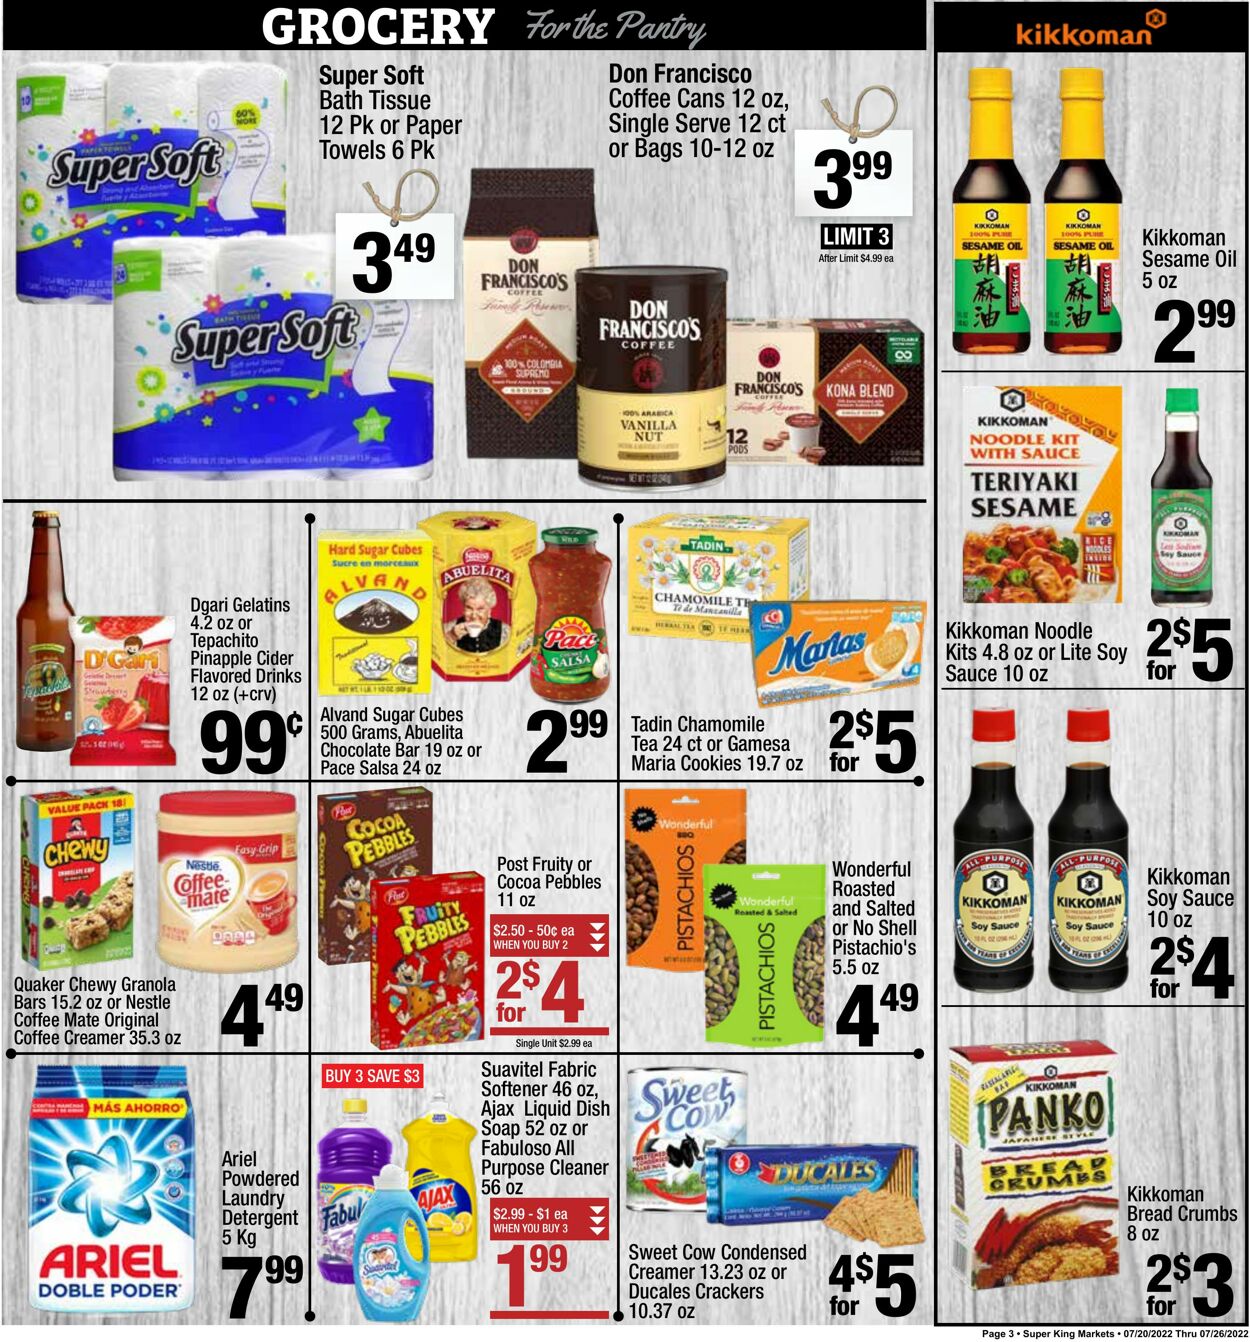 Weekly ad Super King Markets 07/20/2022 - 07/26/2022